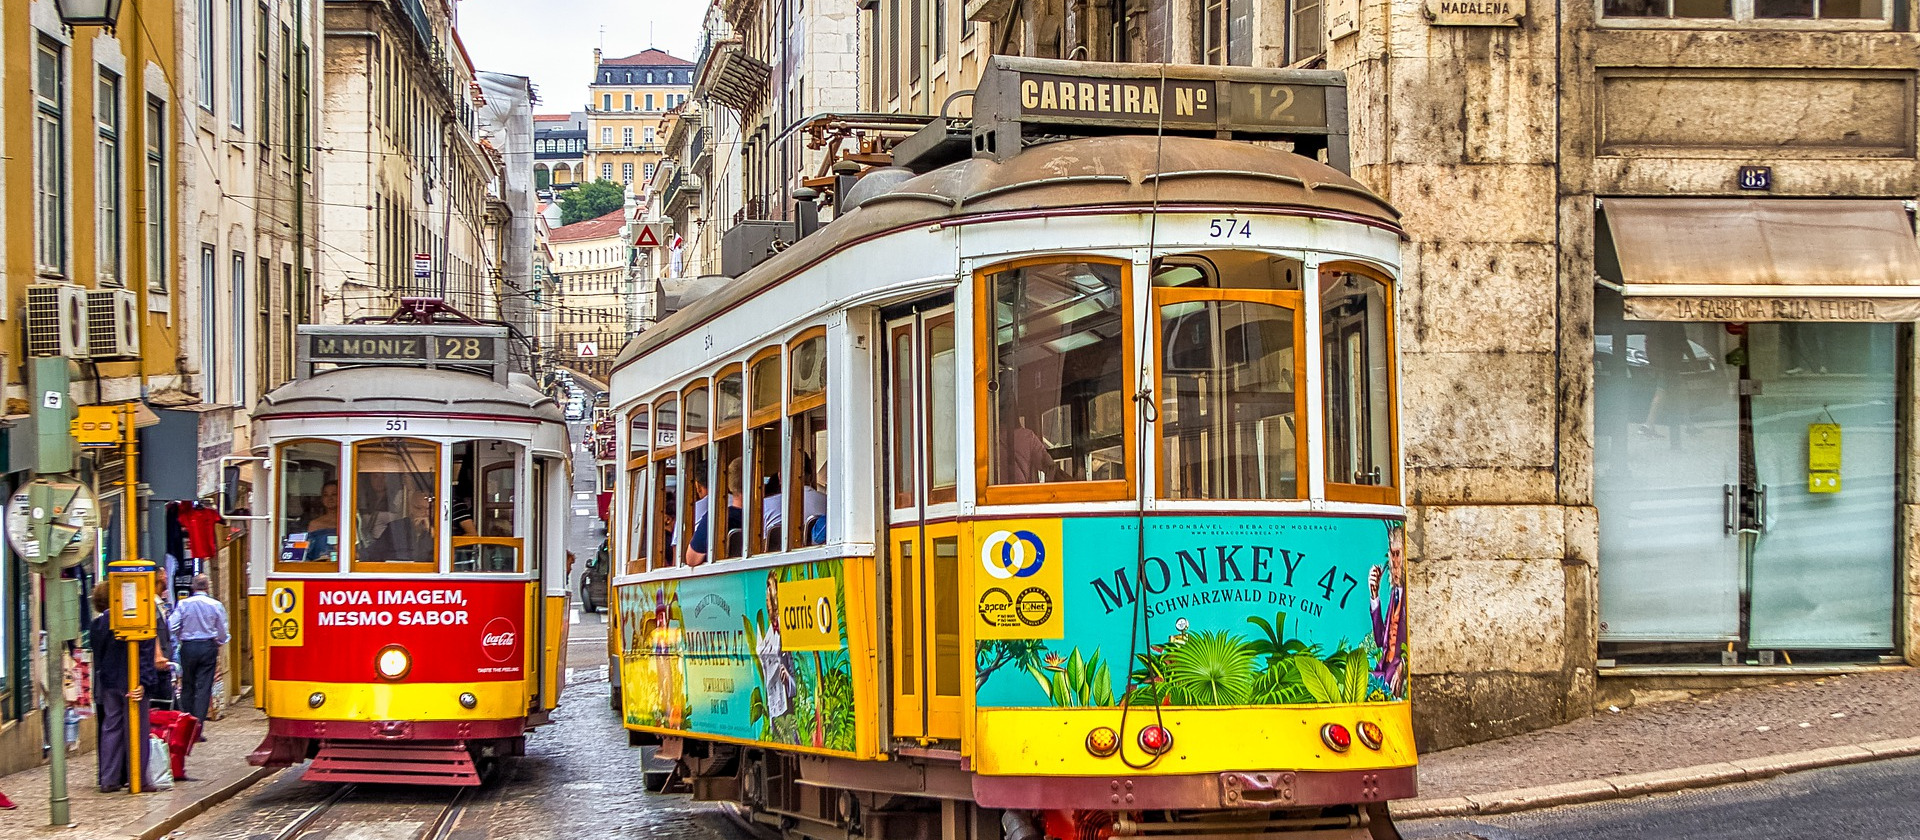 Two trams pass in a street in Lisbon, Portugal.